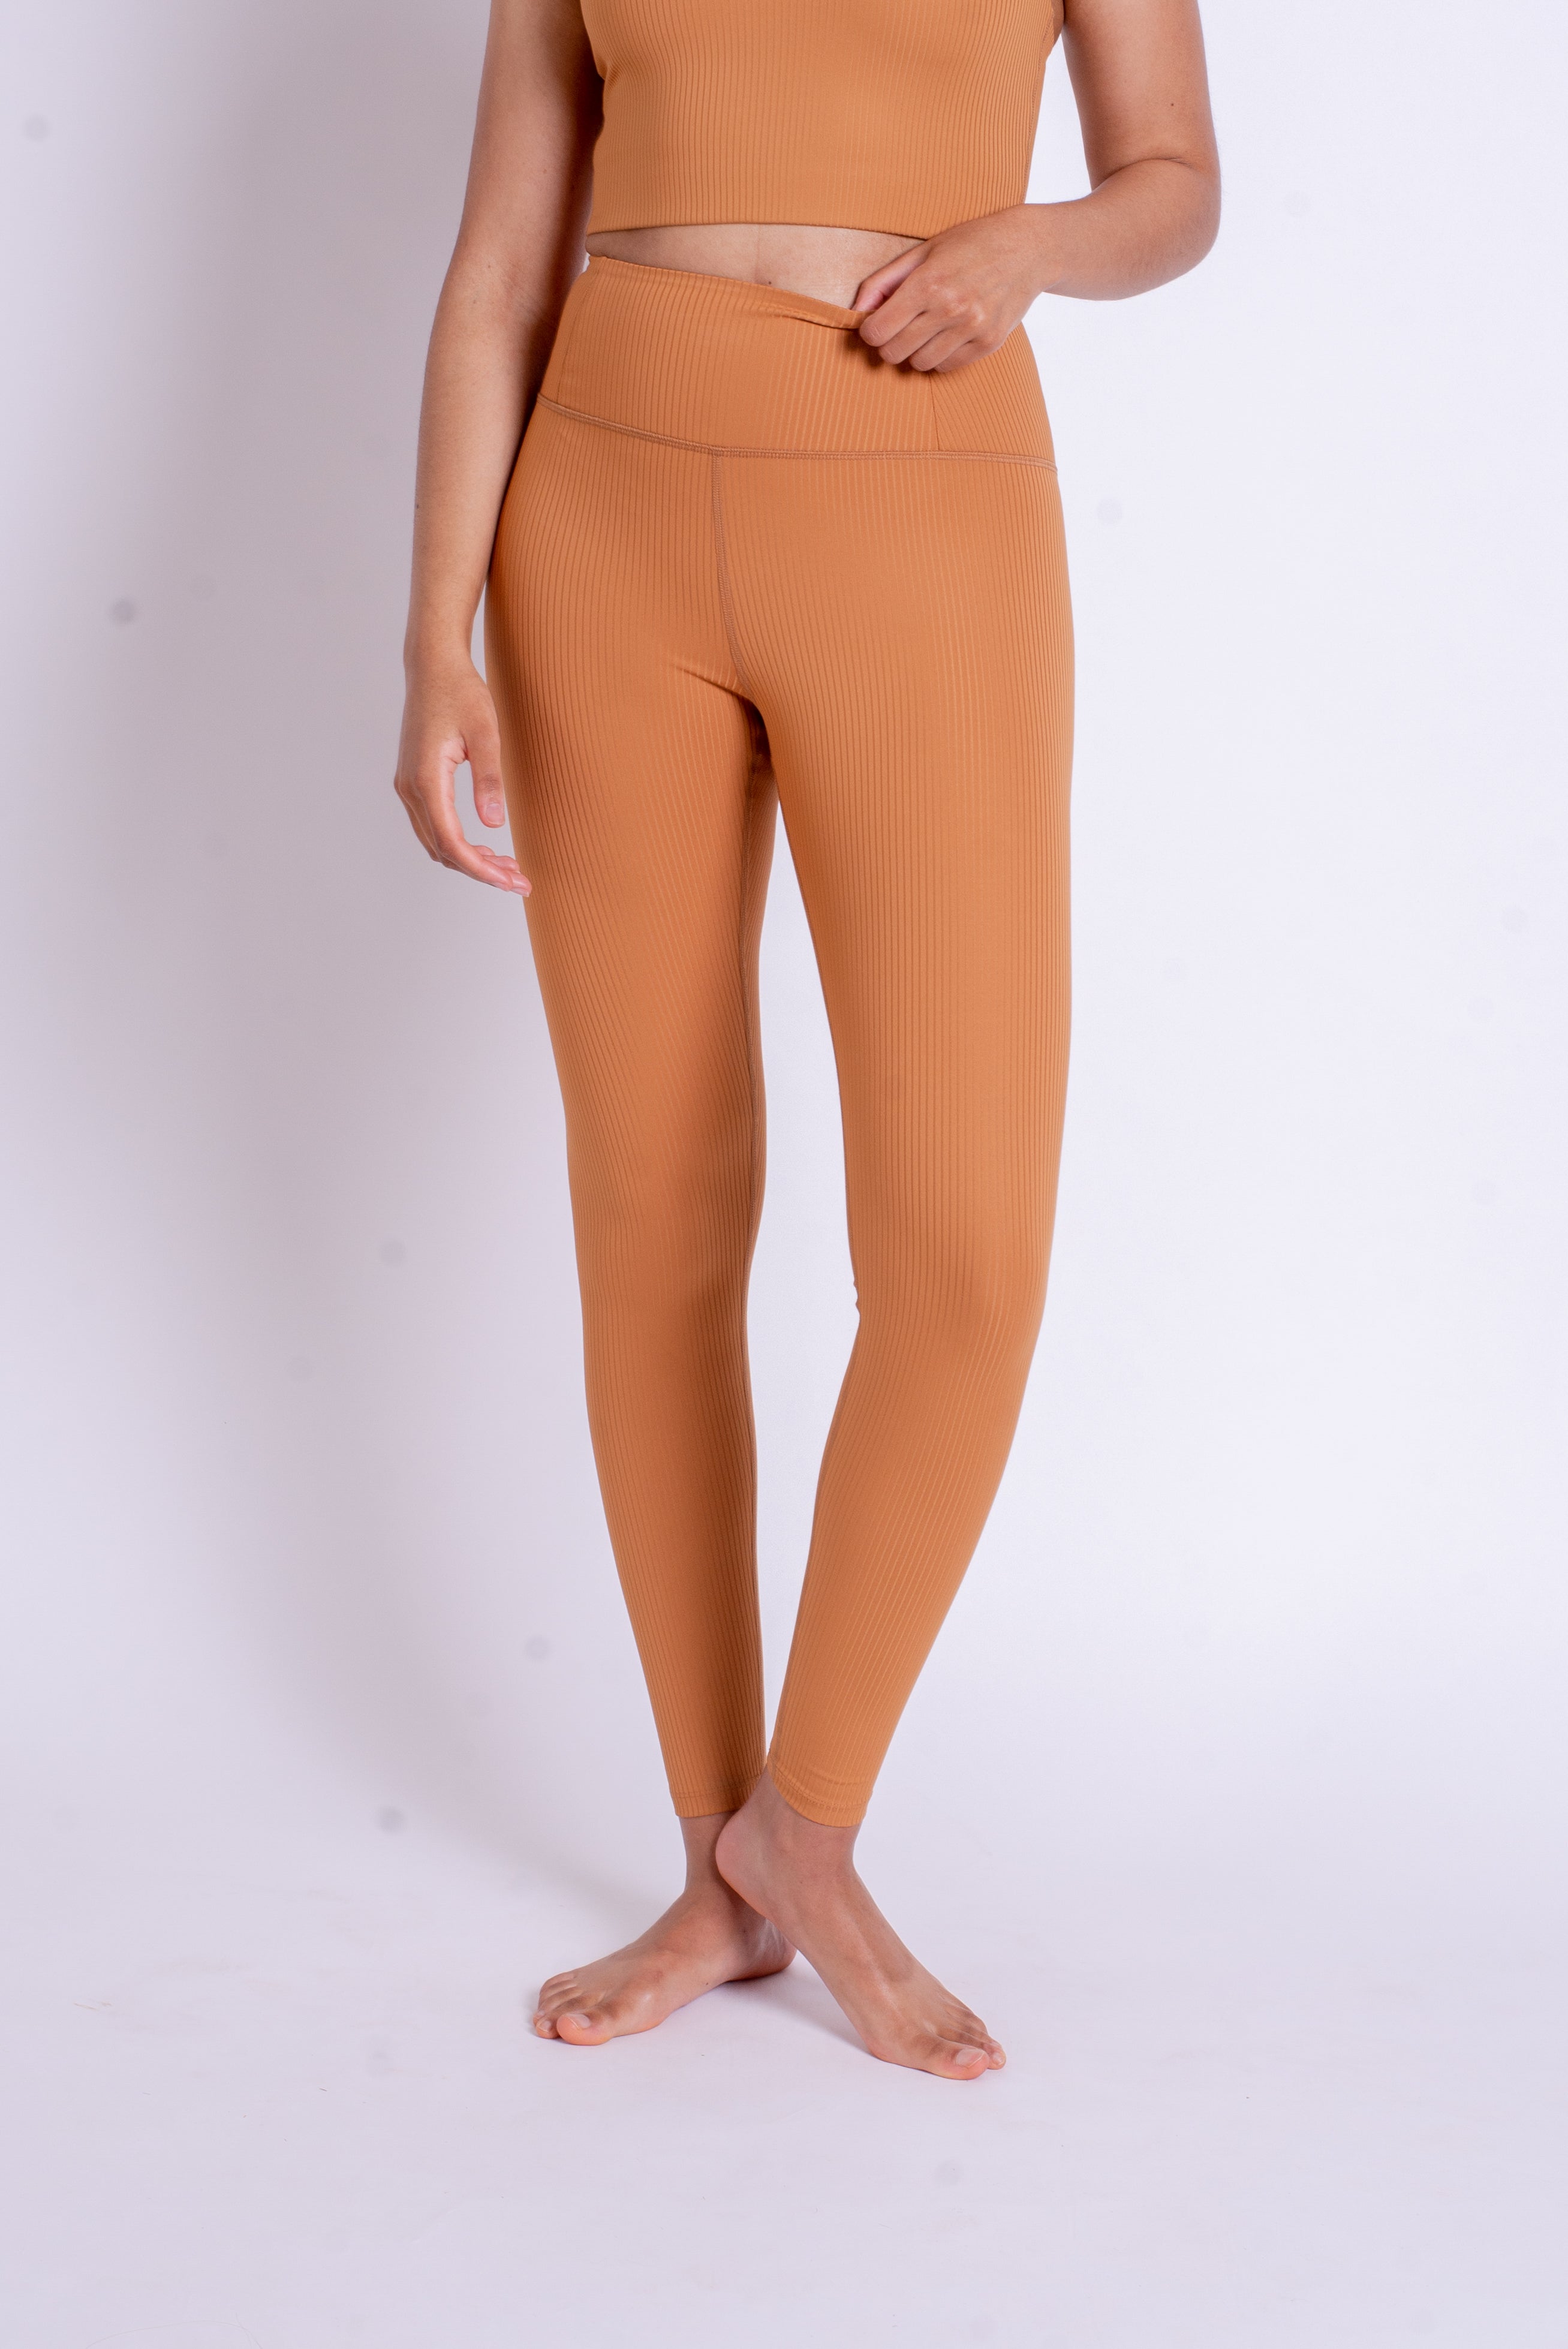 Girlfriend Collective RIB High-Rise Leggings - Made from recycled